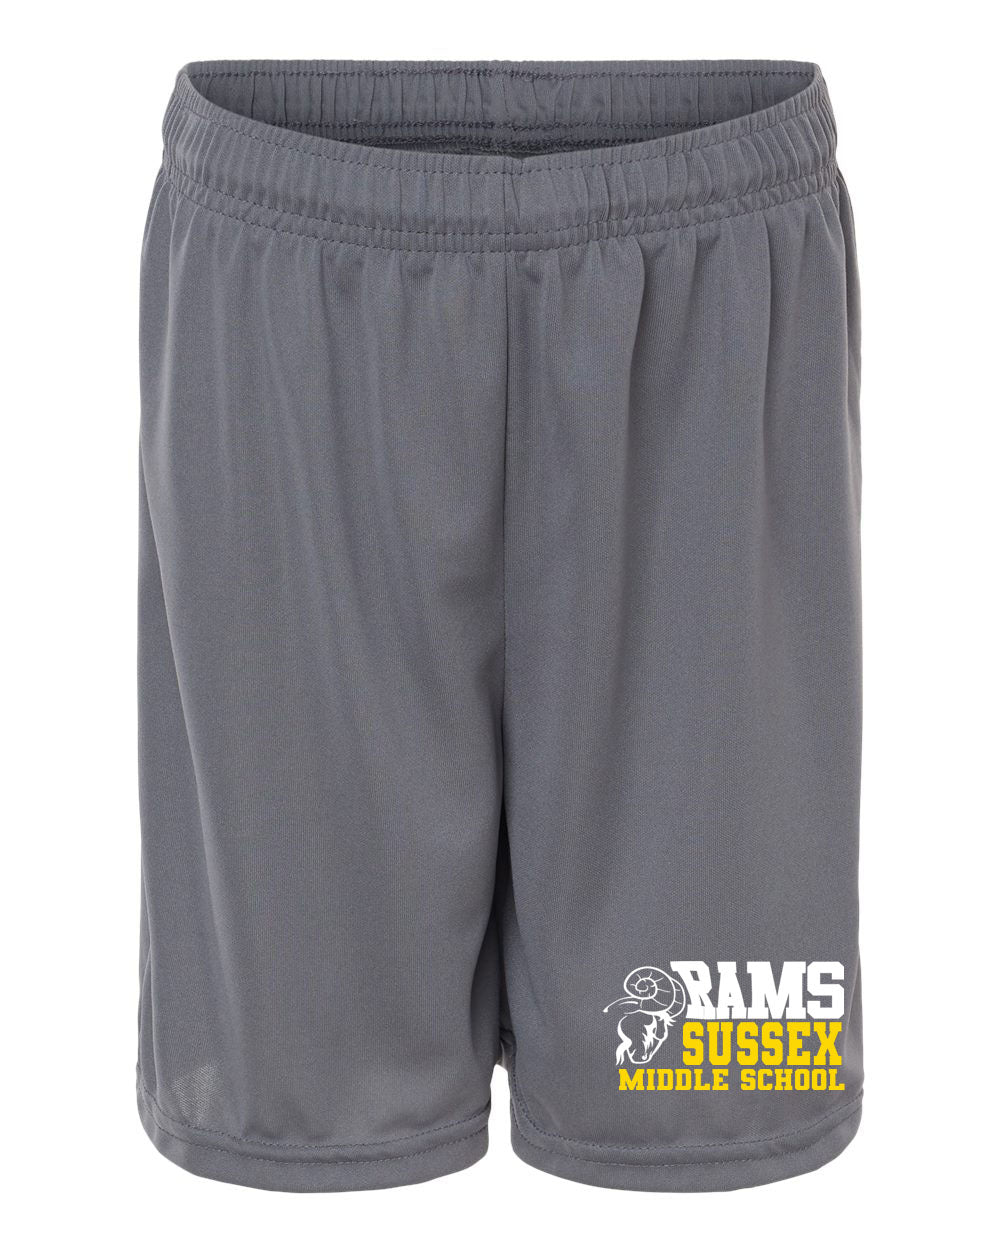 Sussex Middle Design 2 Performance Shorts